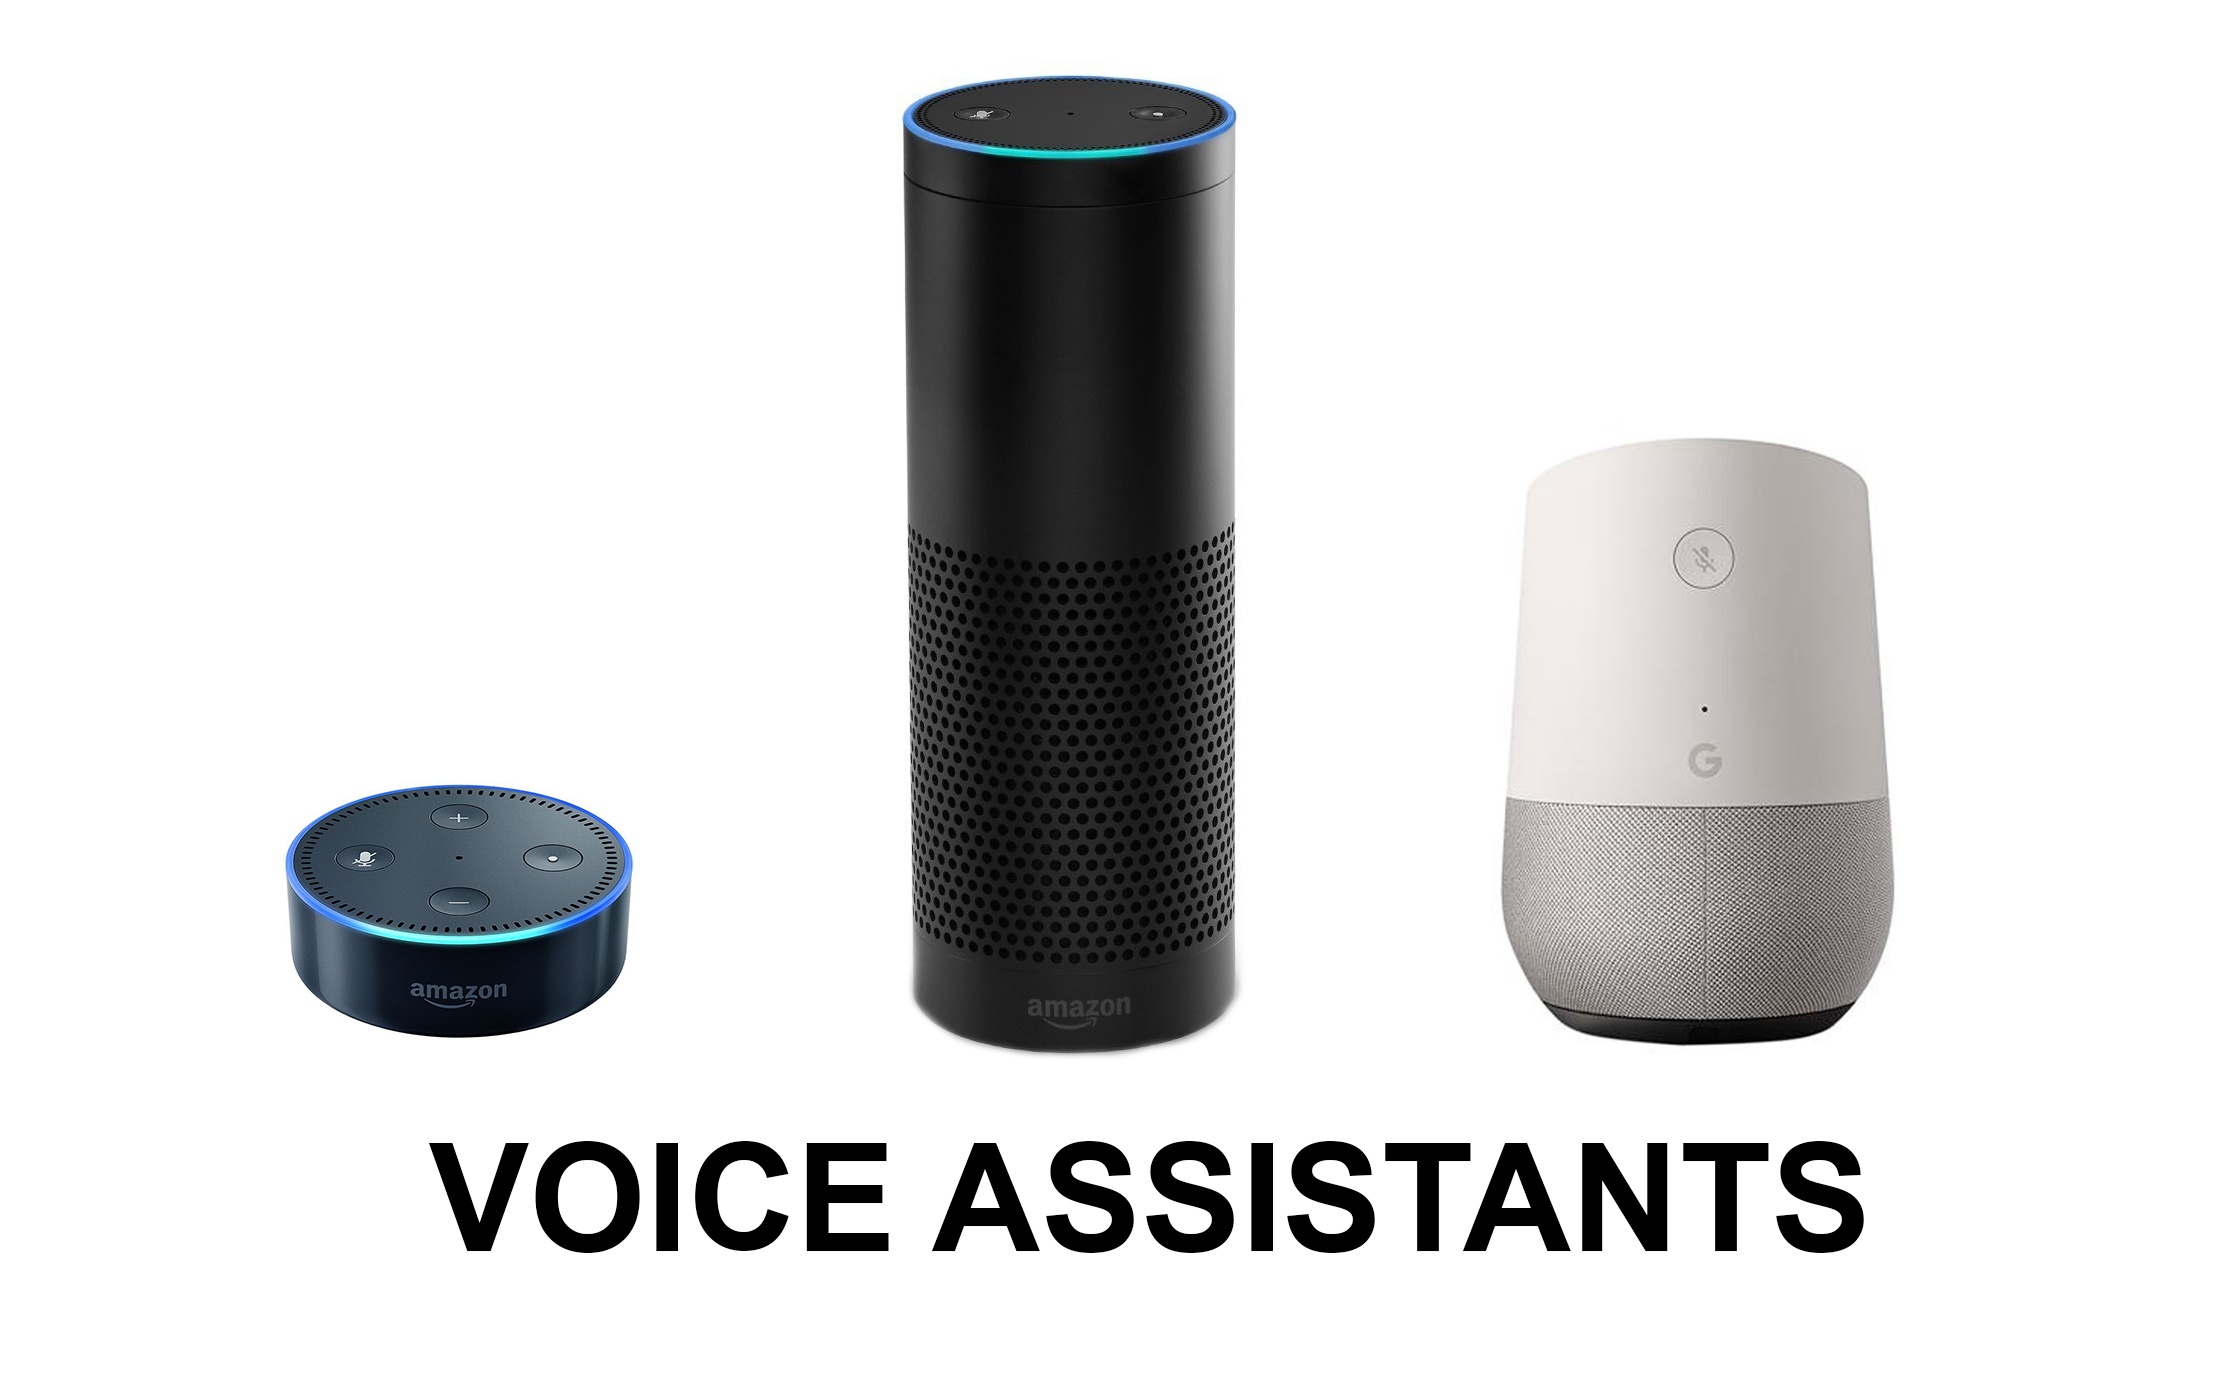  Smart home devices with voice assistants, including the Amazon Echo, Amazon Echo Dot, and Google Home.